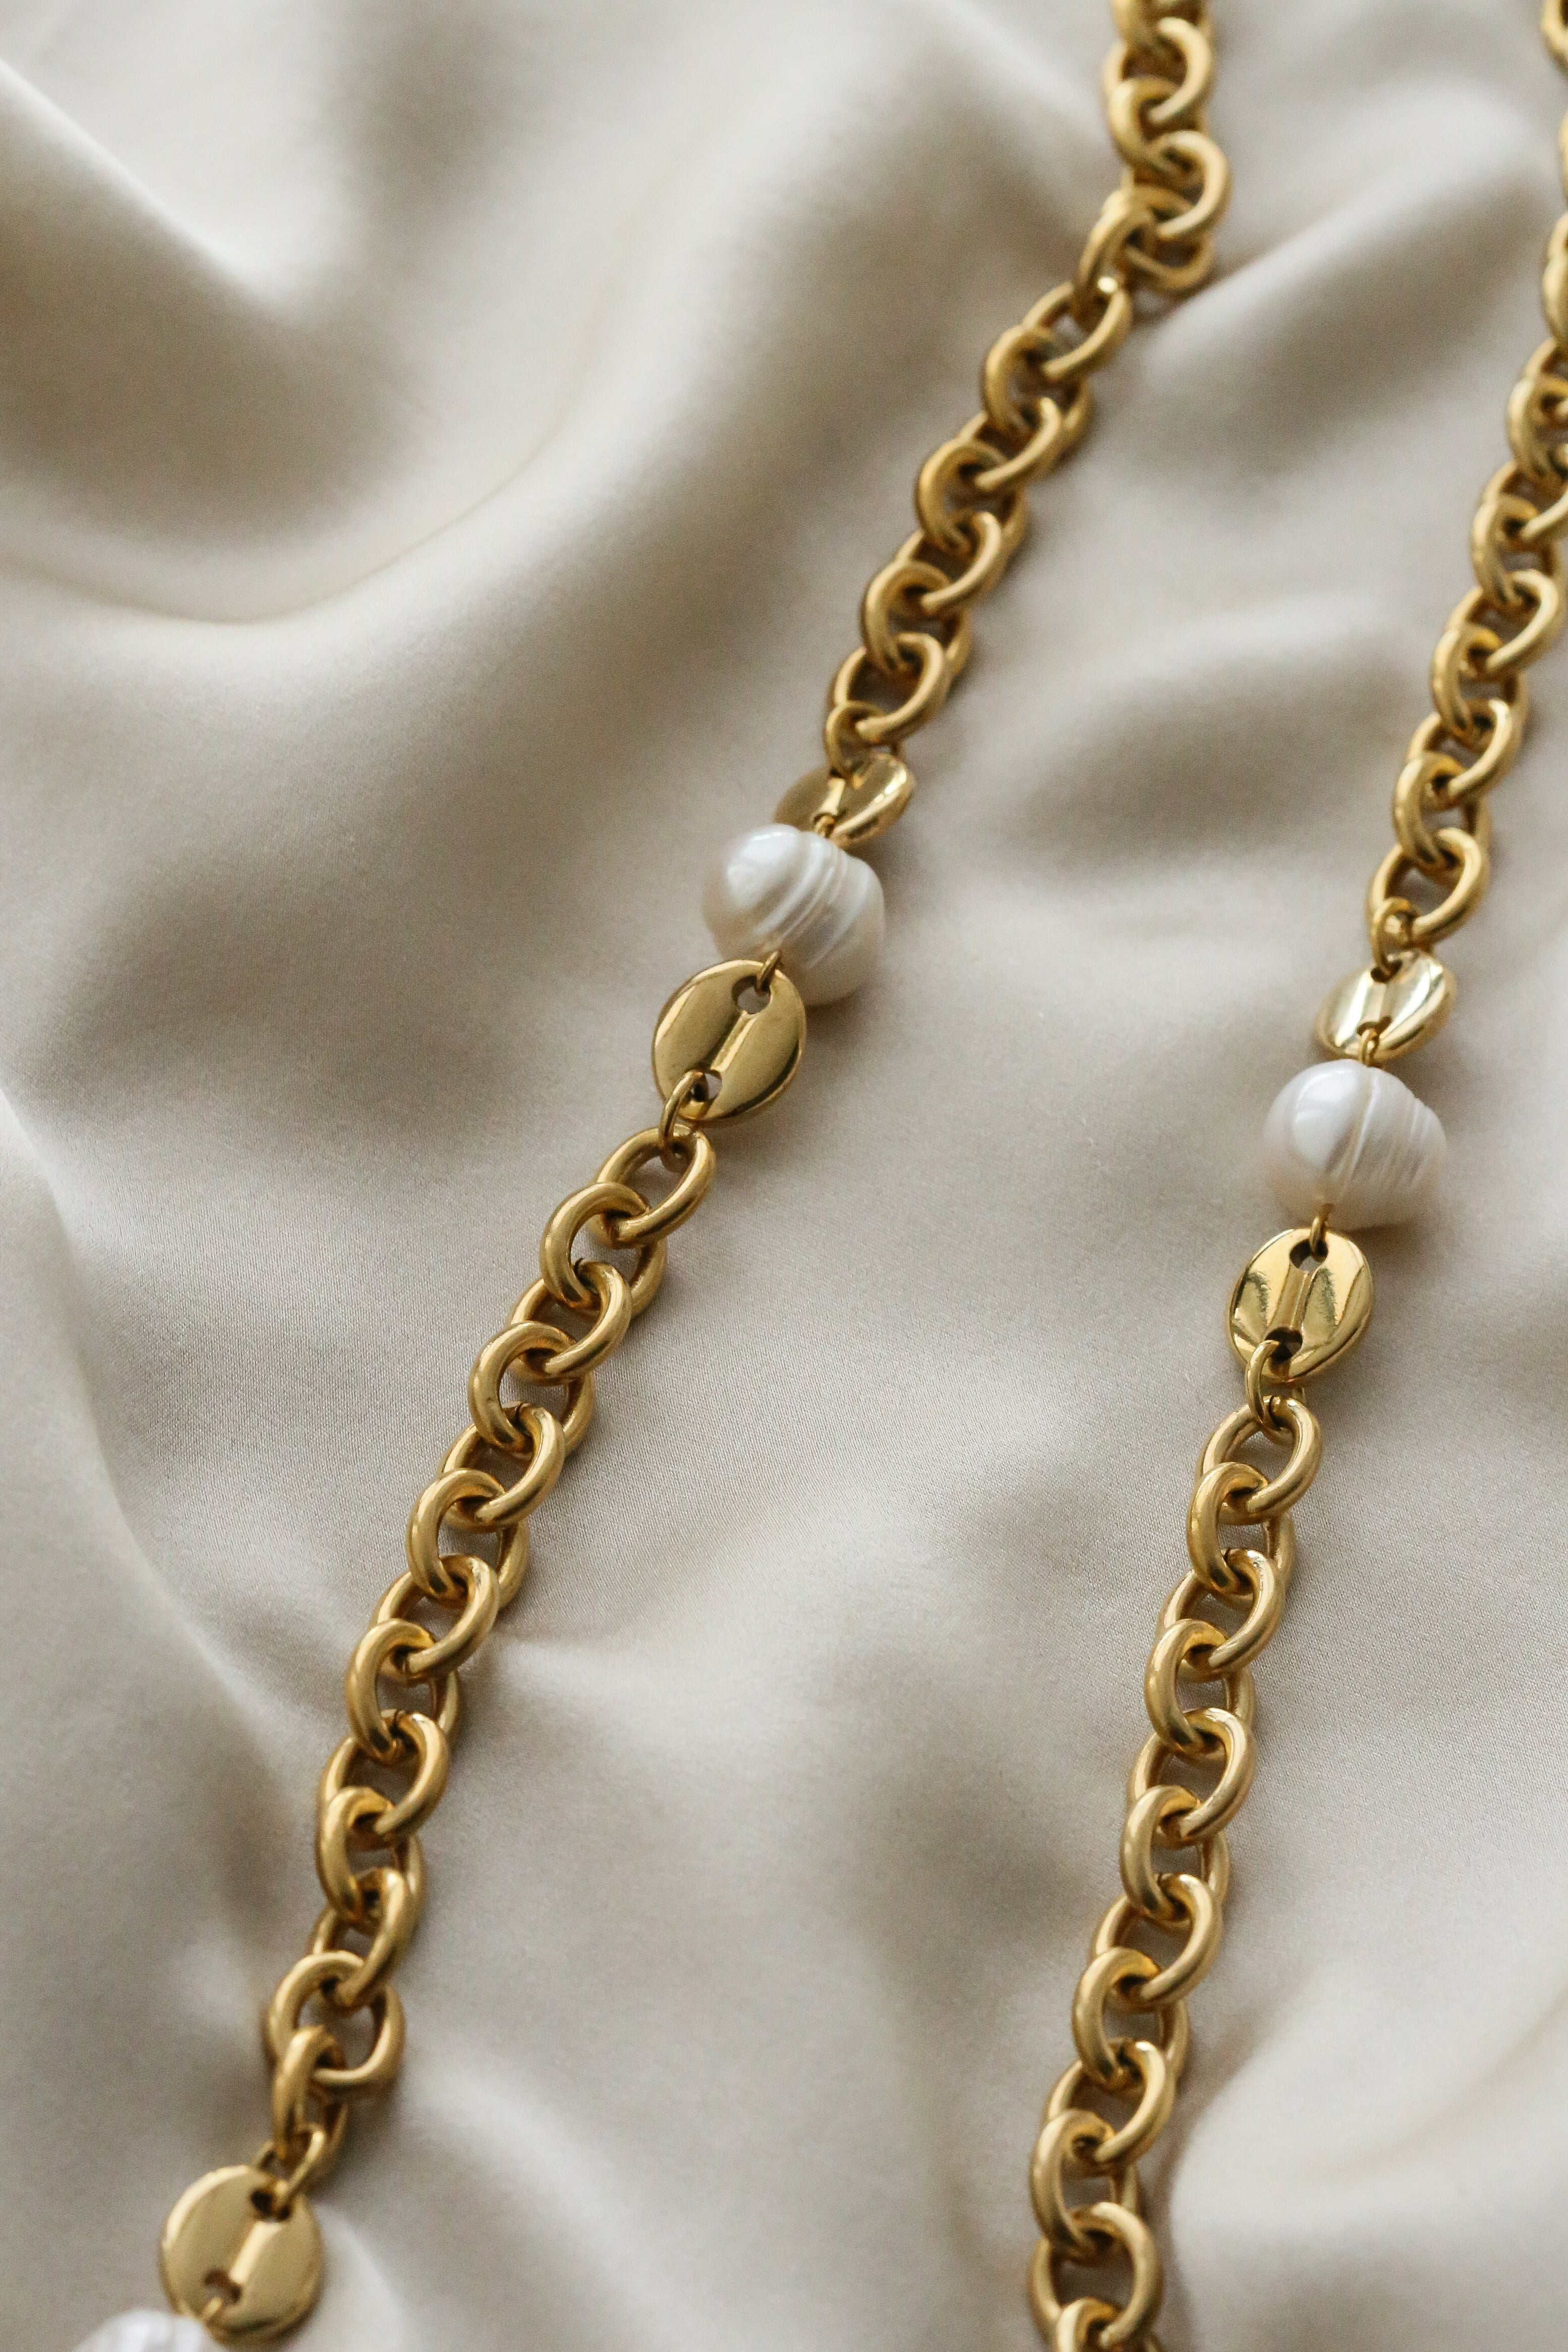 Vera Long Necklace - Boutique Minimaliste has waterproof, durable, elegant and vintage inspired jewelry